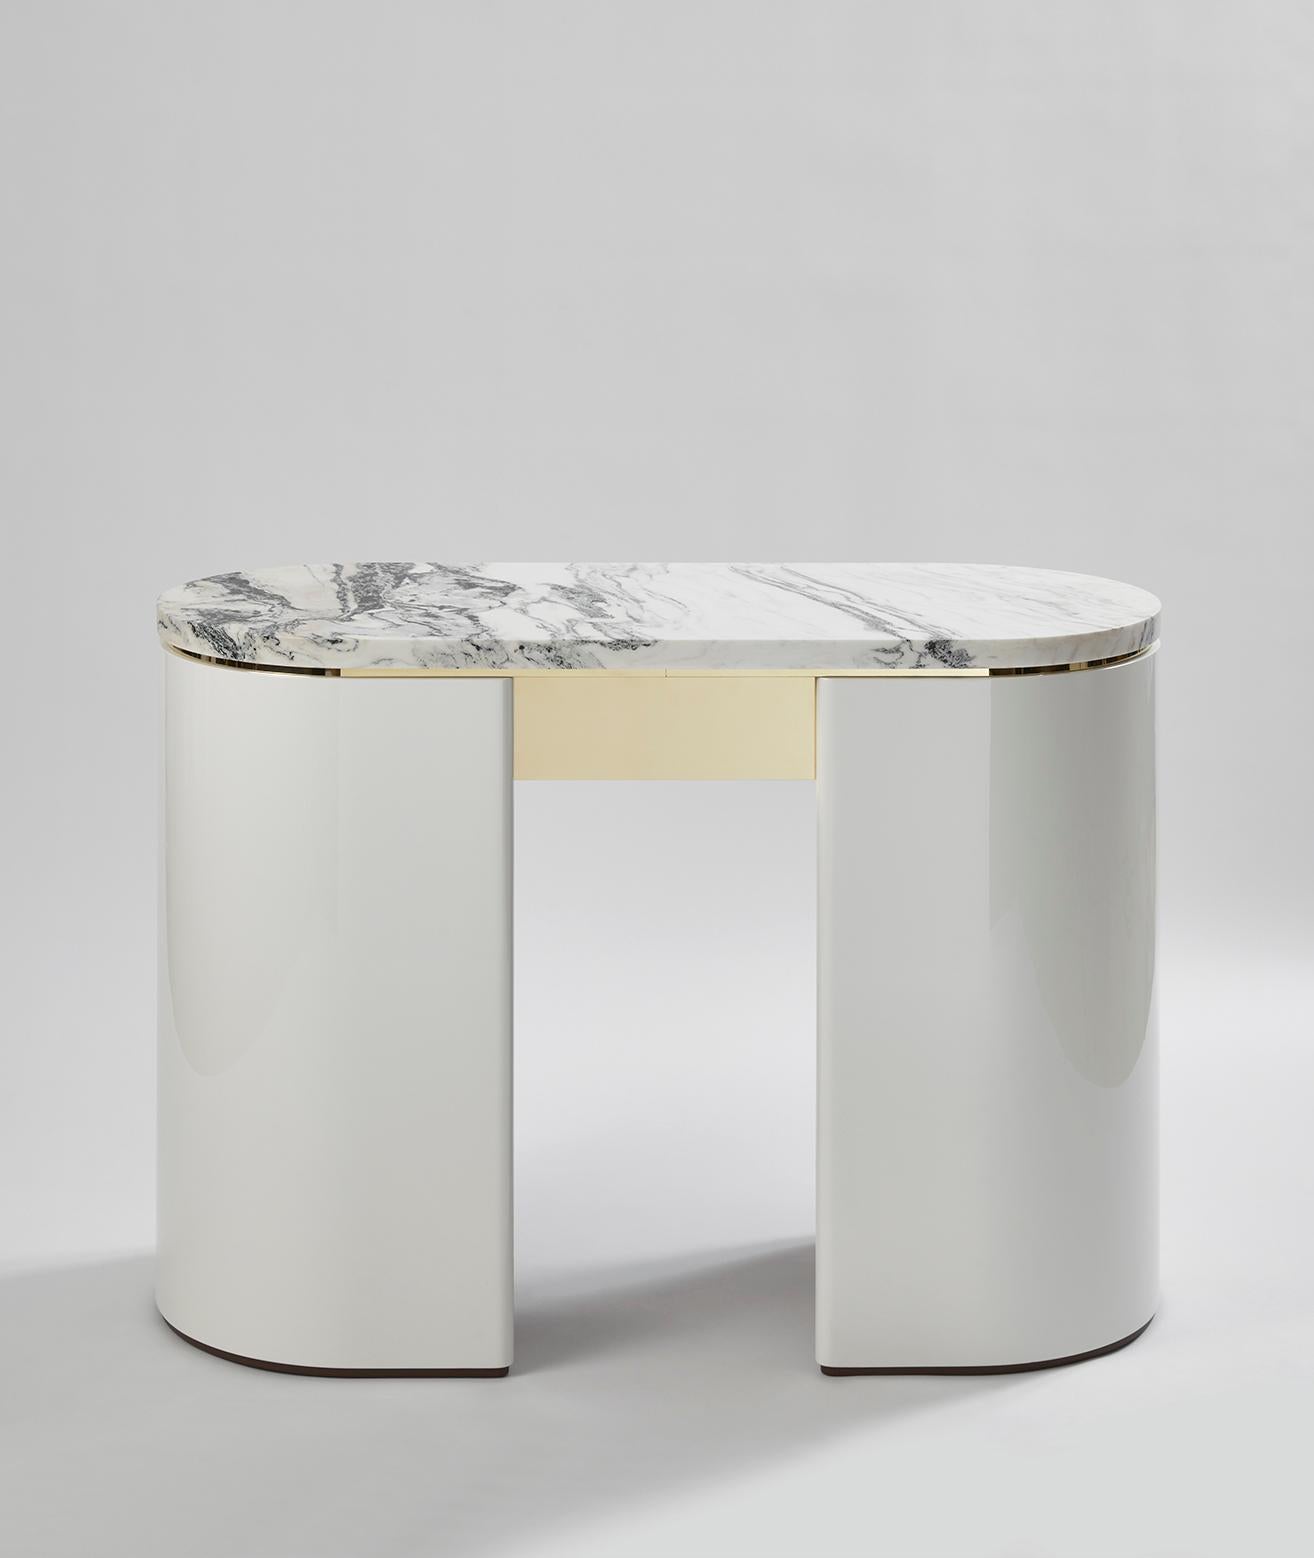 Capri, Console desk, designed by Hervé Langlais for the Gallery Negropontes

H 29.7 x W 41.3 x D, 17.7 inch
Marble and lacquered wood with brass details

Hervé Langlais is a graduate of the Normandy School of Architecture in Rouen. He collaborated